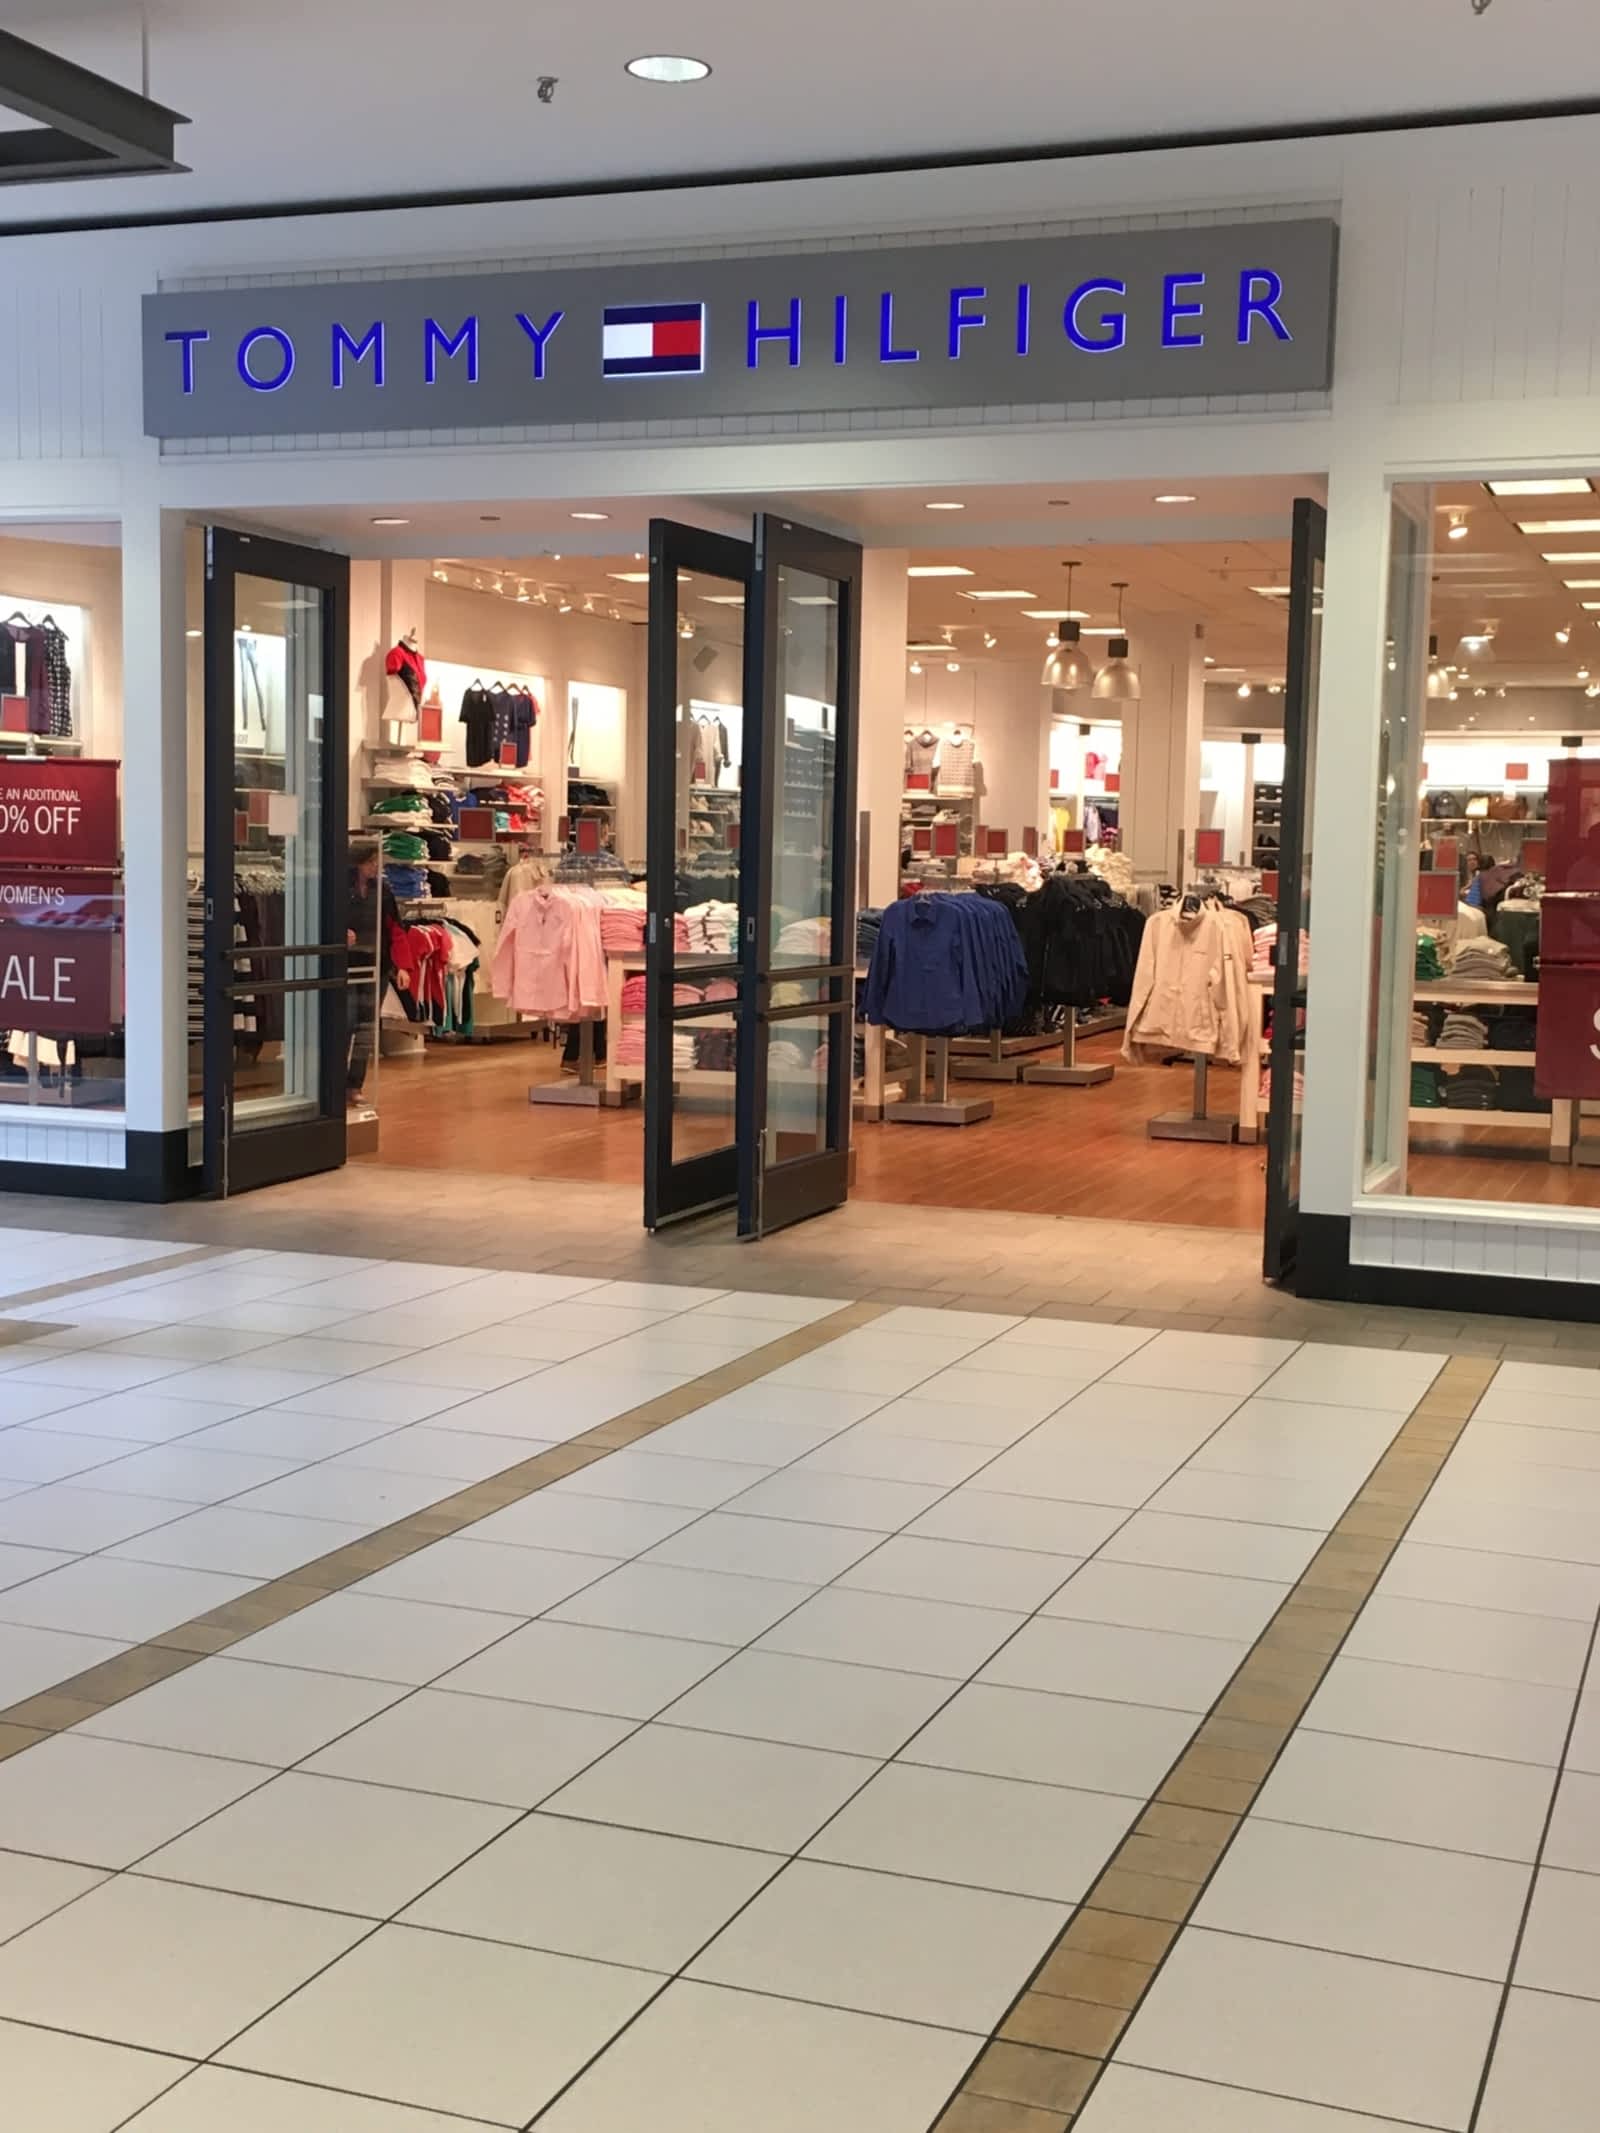 difference tommy jeans tommy hilfiger